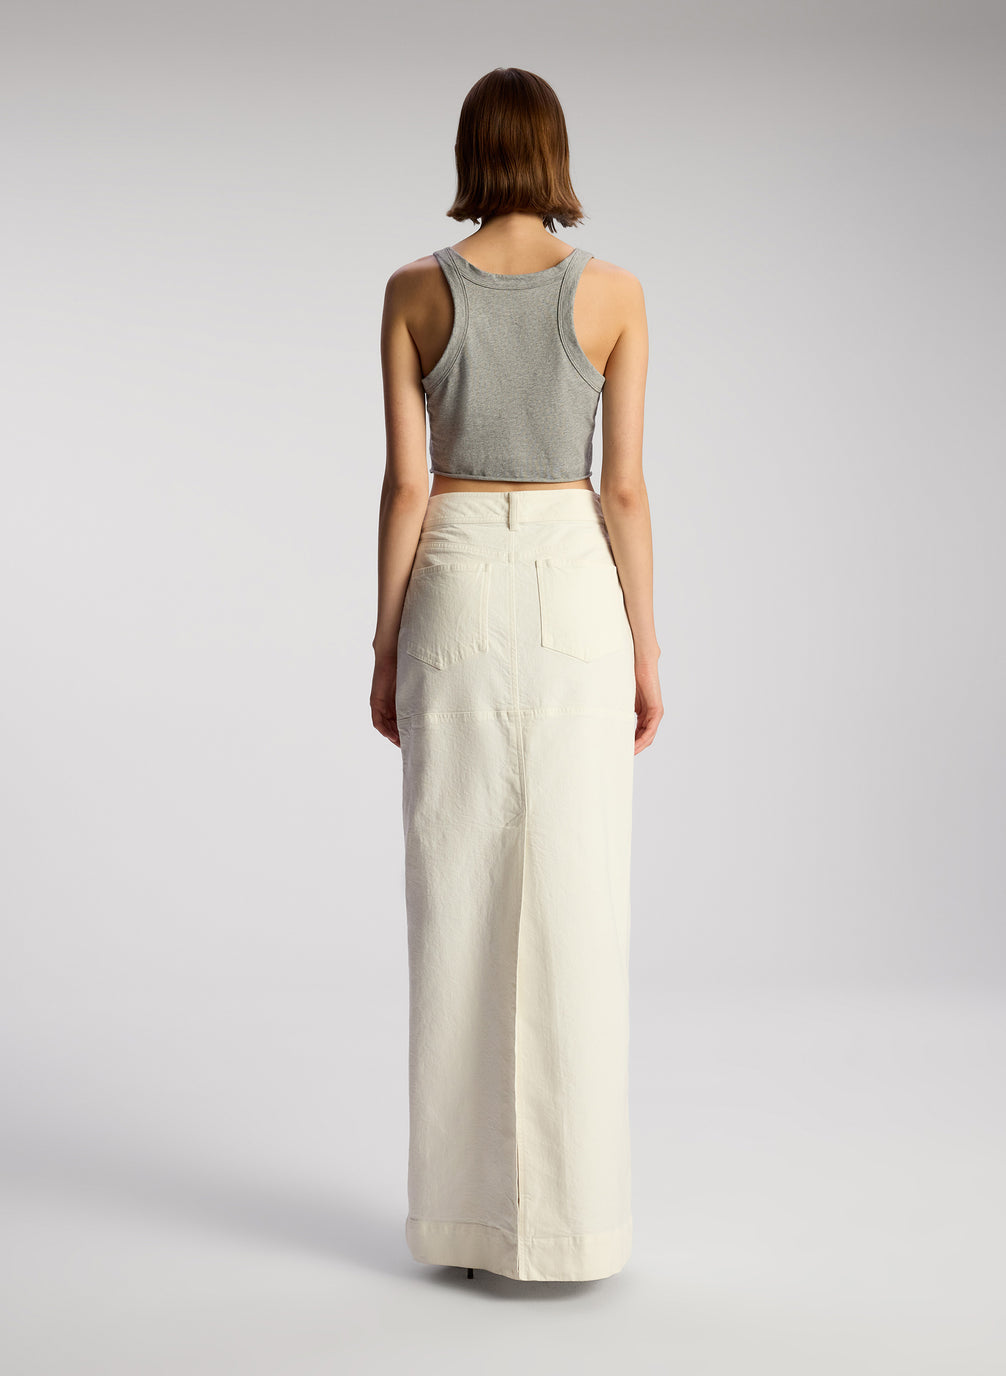 back view of woman wearing grey cropped tank and whit maxi skirt